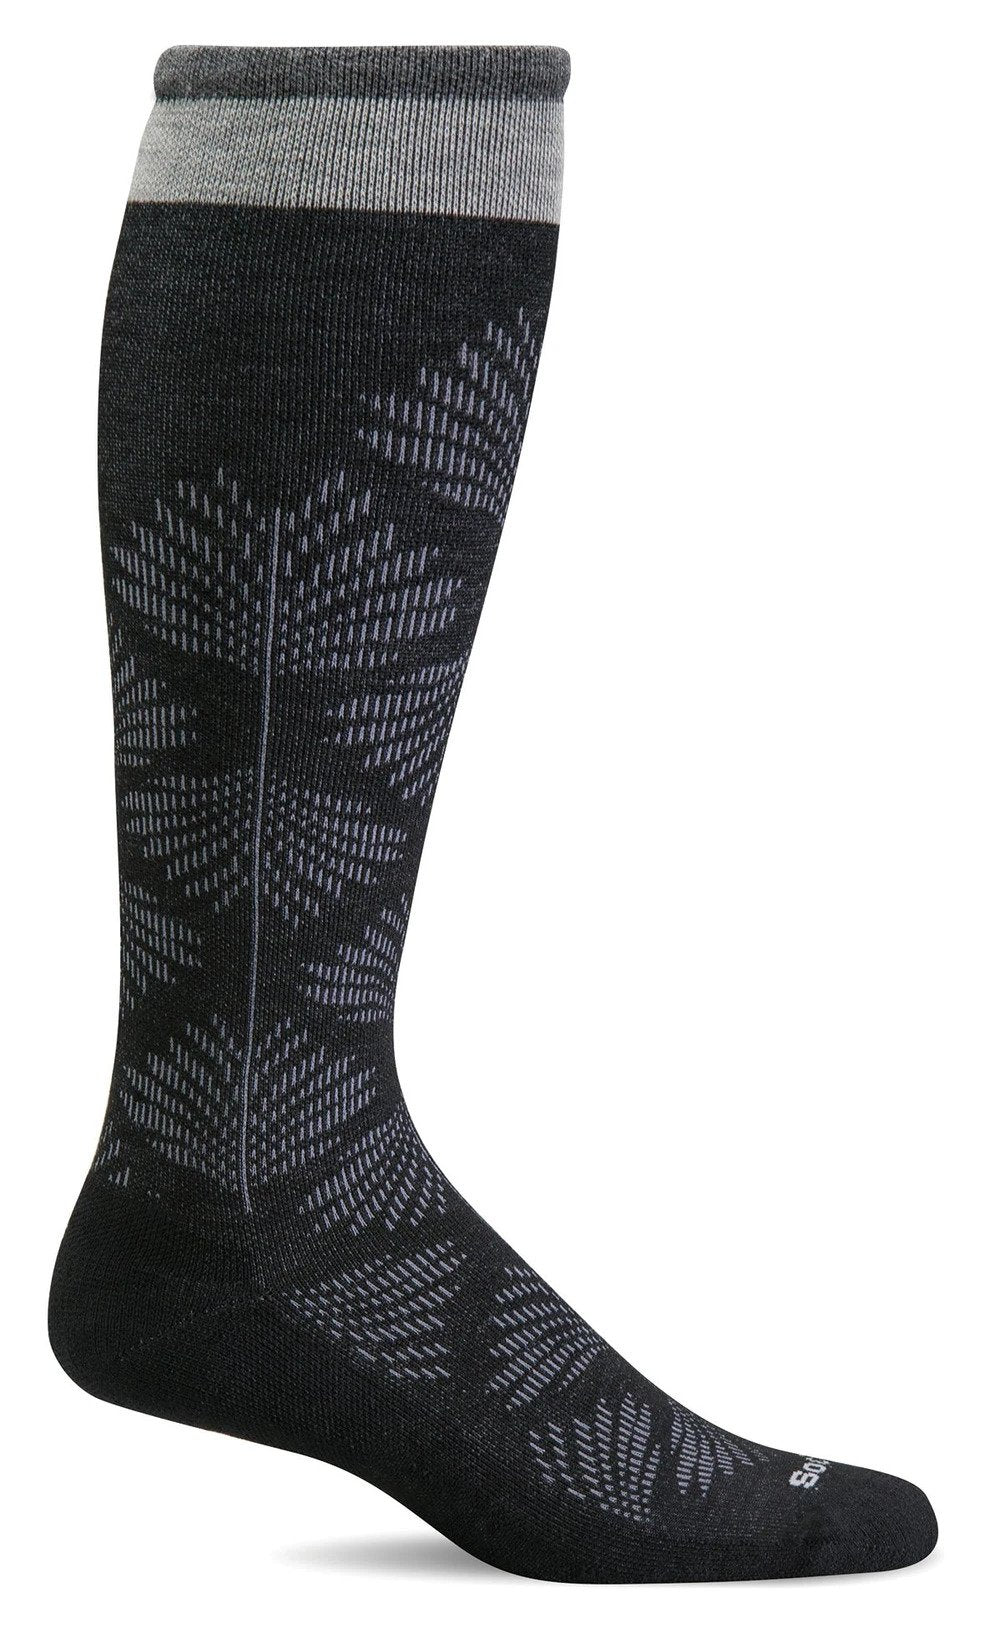 Full Floral Black Graduated Compression Wide Calf (Women's size scale)